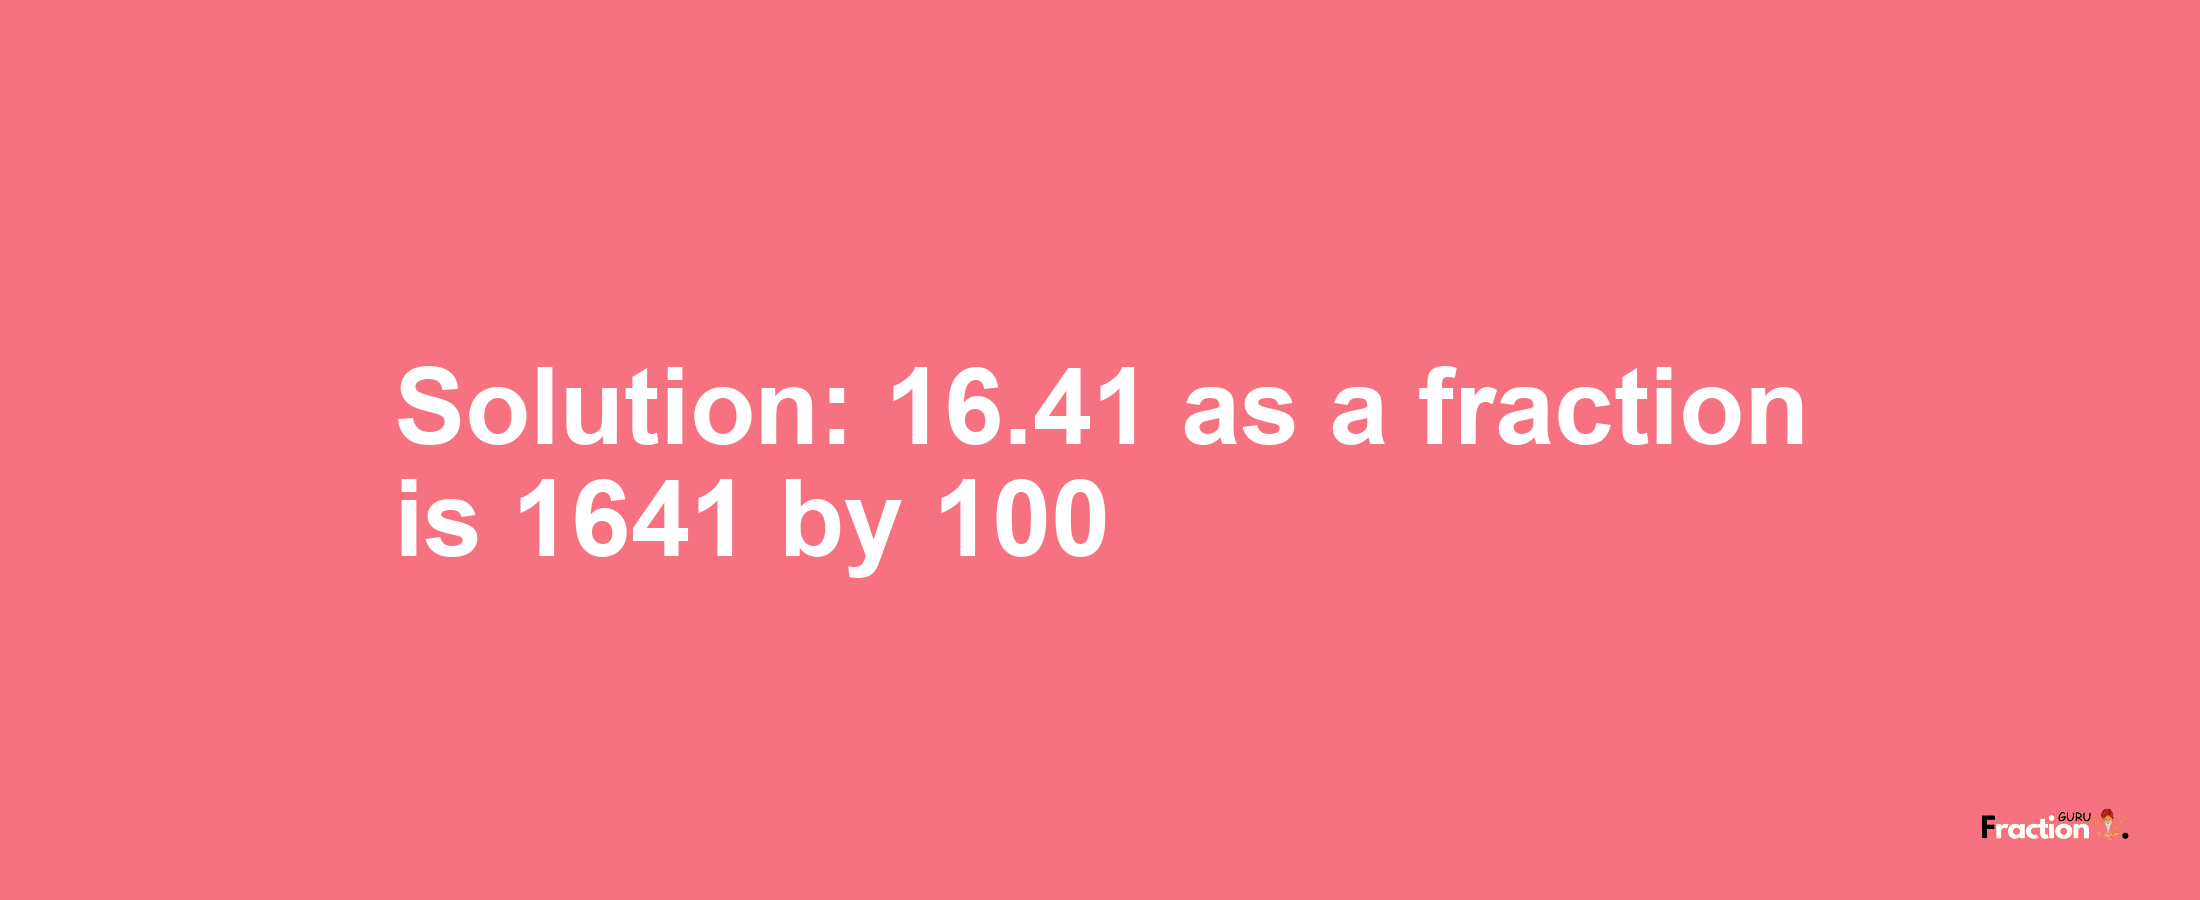 Solution:16.41 as a fraction is 1641/100